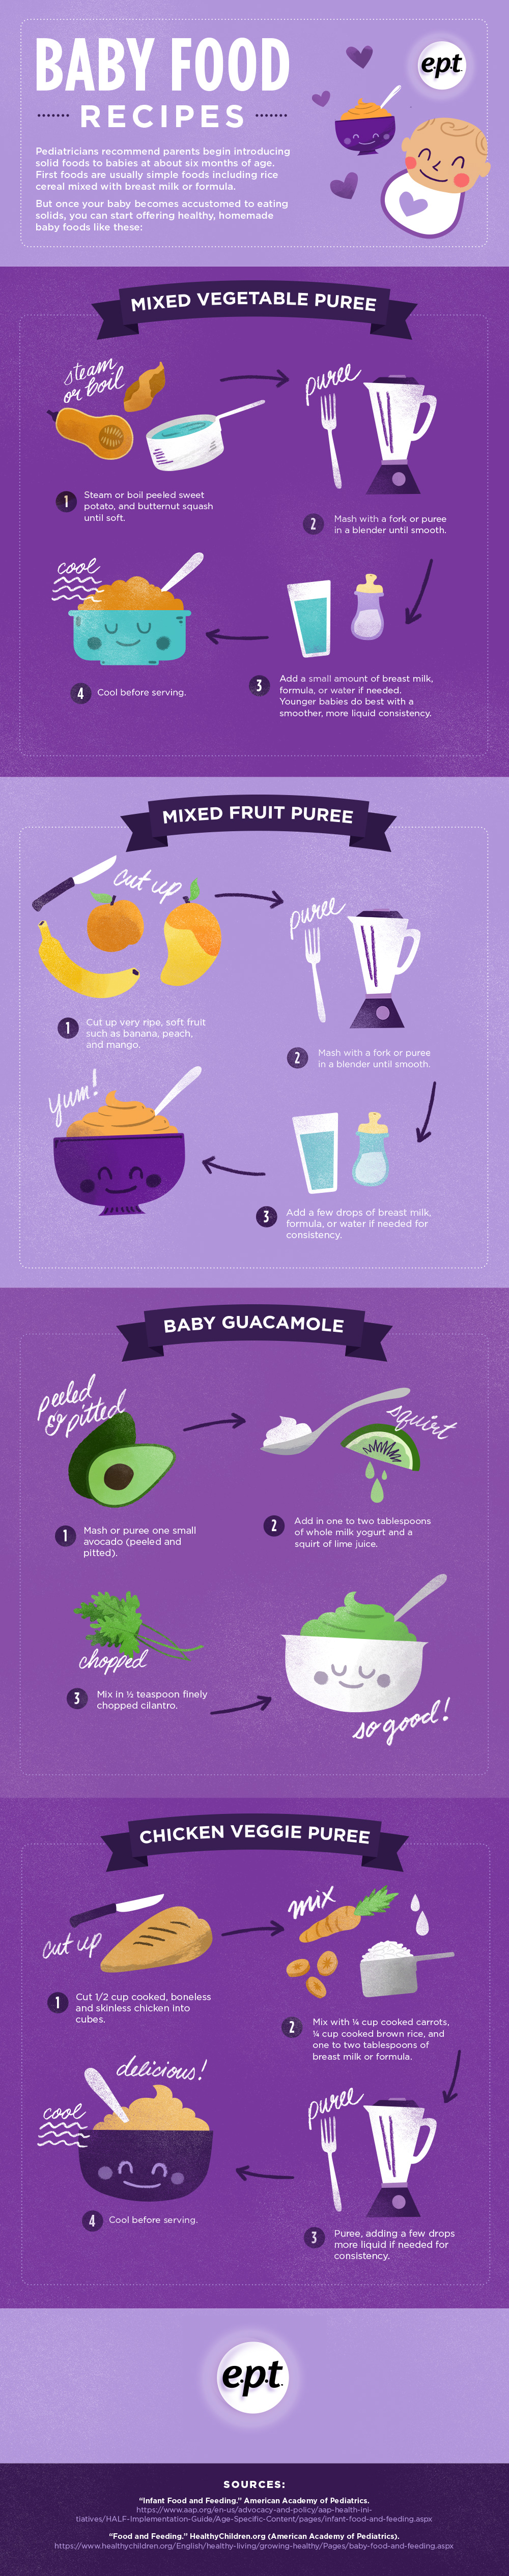 Baby Food Recipes Infographic by Samantha Leigh Smith on Dribbble